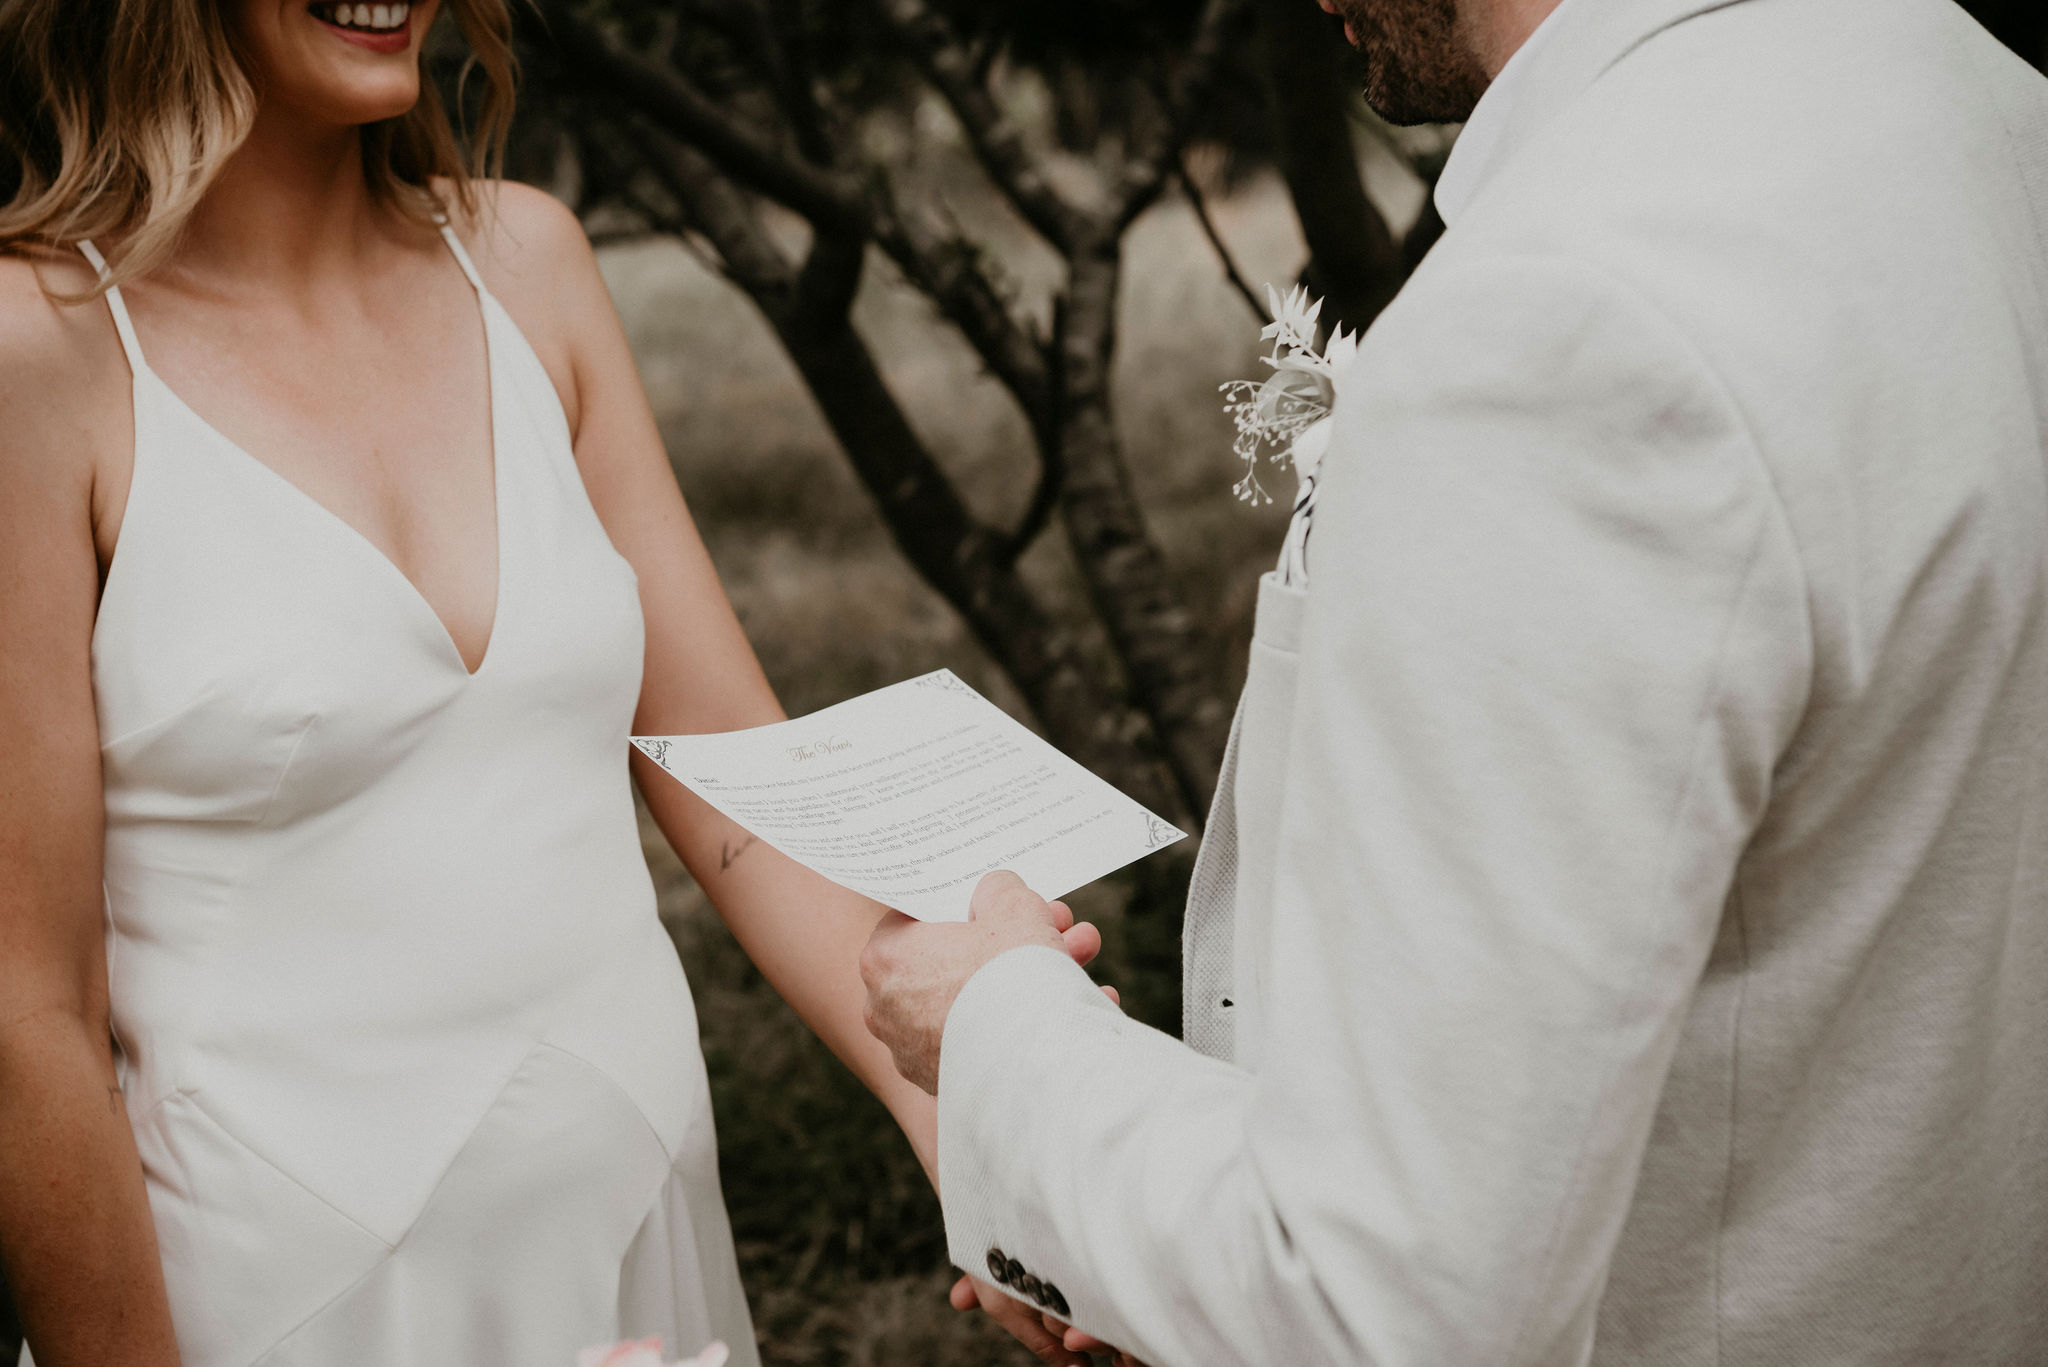 Lets-Elope-Melbourne-Celebrant-Photographer-Elopement-Package-Victoria-Sarah-Matler-Photography-Orchard-with-Kids-Farm-Vigano-weddings-intimate-3